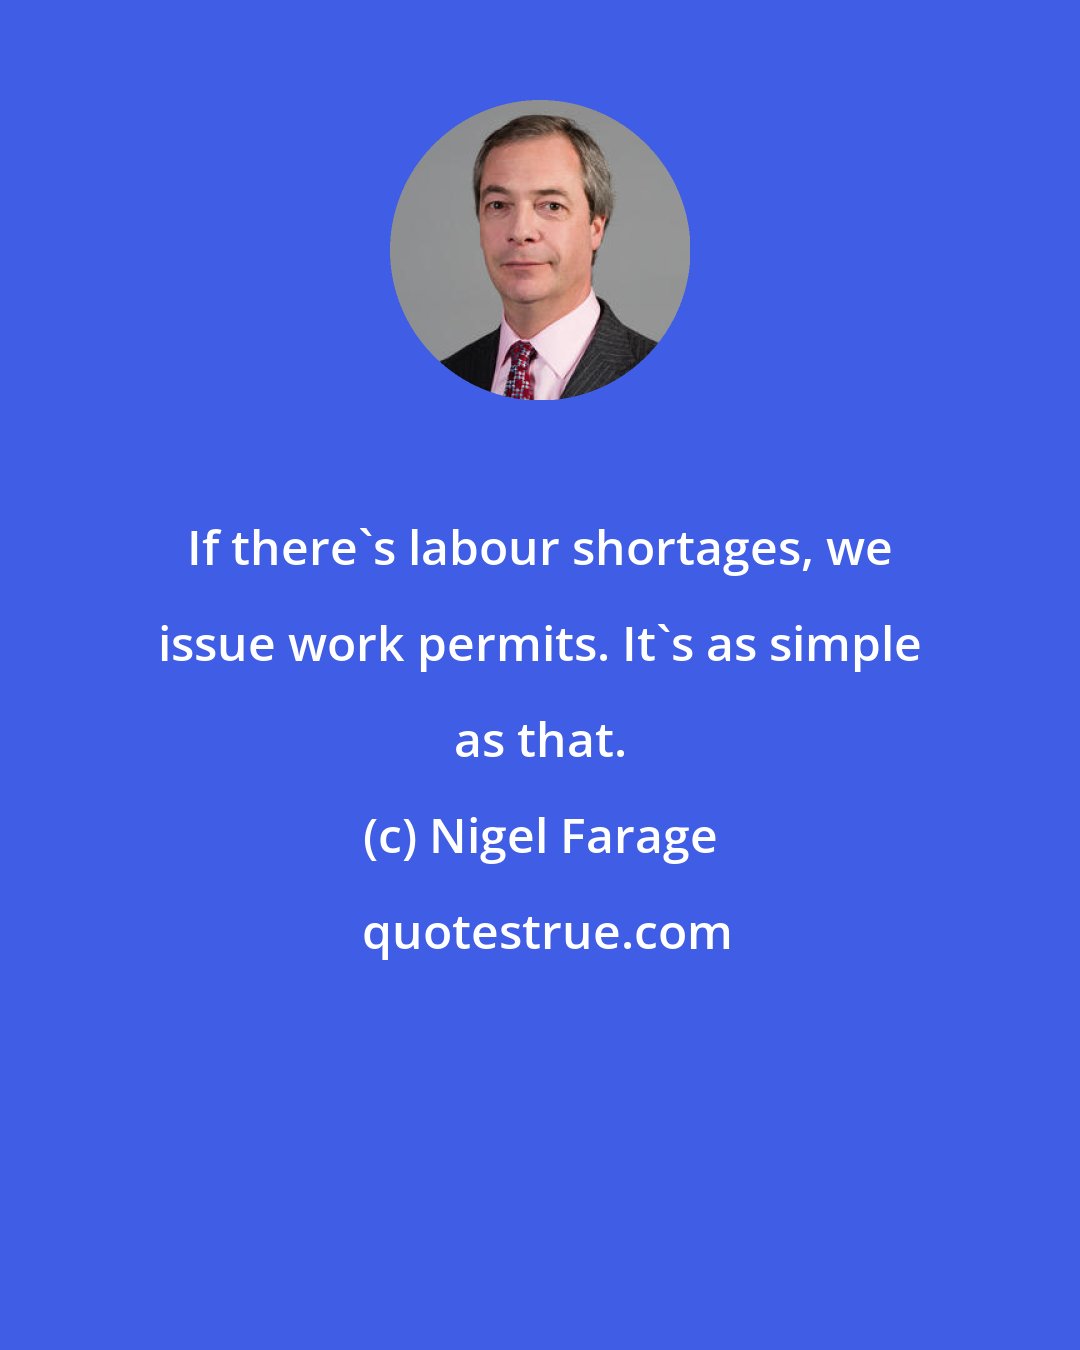 Nigel Farage: If there's labour shortages, we issue work permits. It's as simple as that.